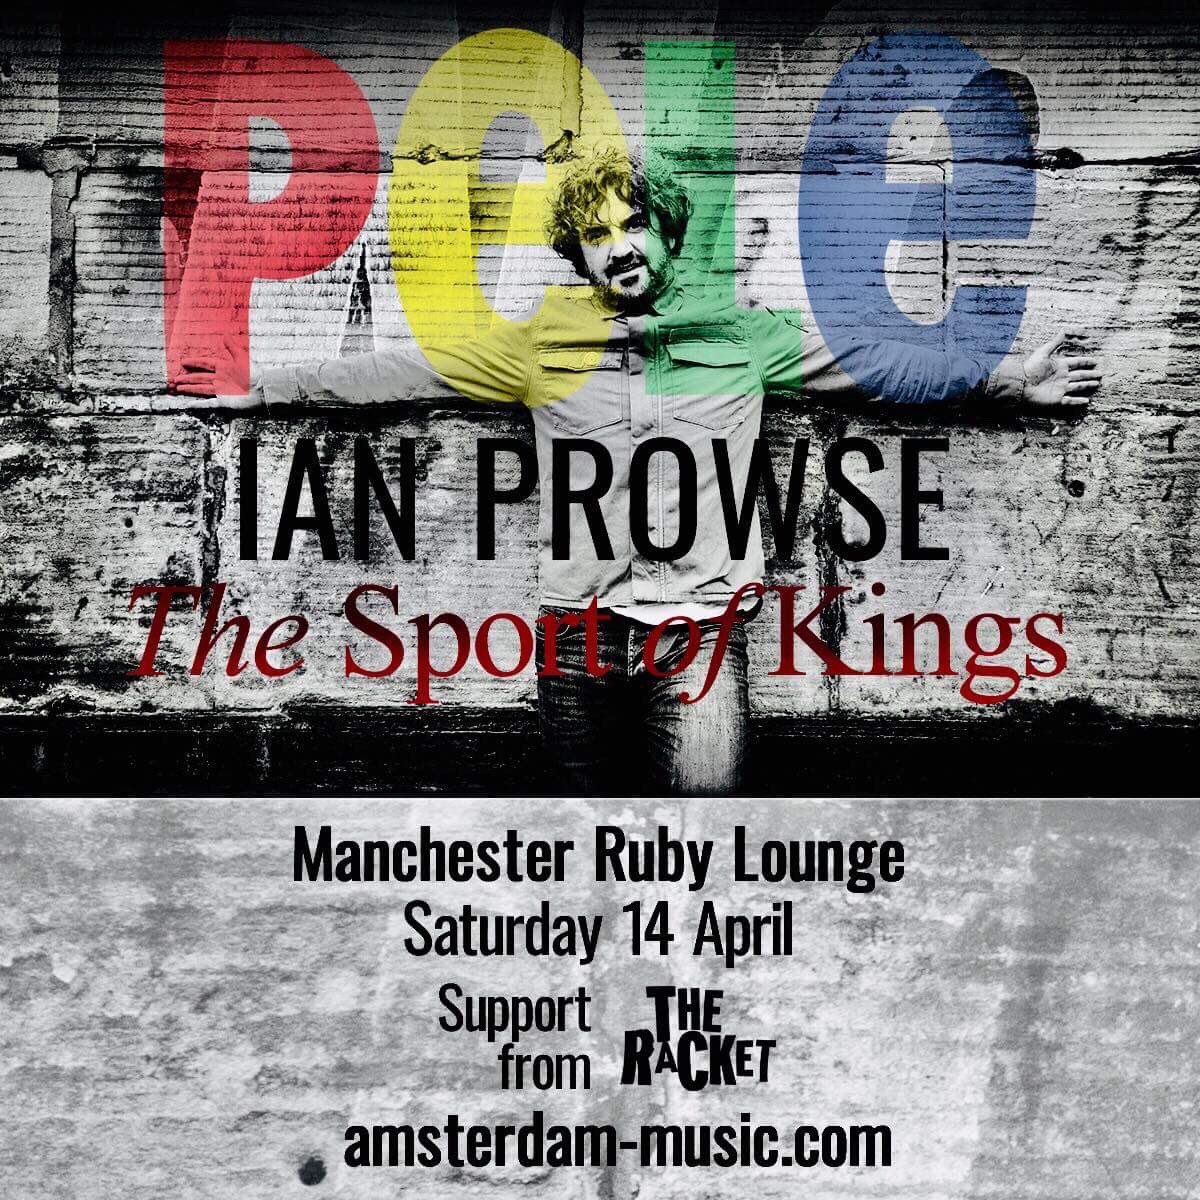 After last weeks announcement about supporting @castofficial we can also announce that we’ll be supporting @IanProwse on two dates on the Sport of Kings tour! Manchester, Ruby Lounge - Sat 14th April Leeds, Brudenell - Sat 21st April Message the page for ticket details.